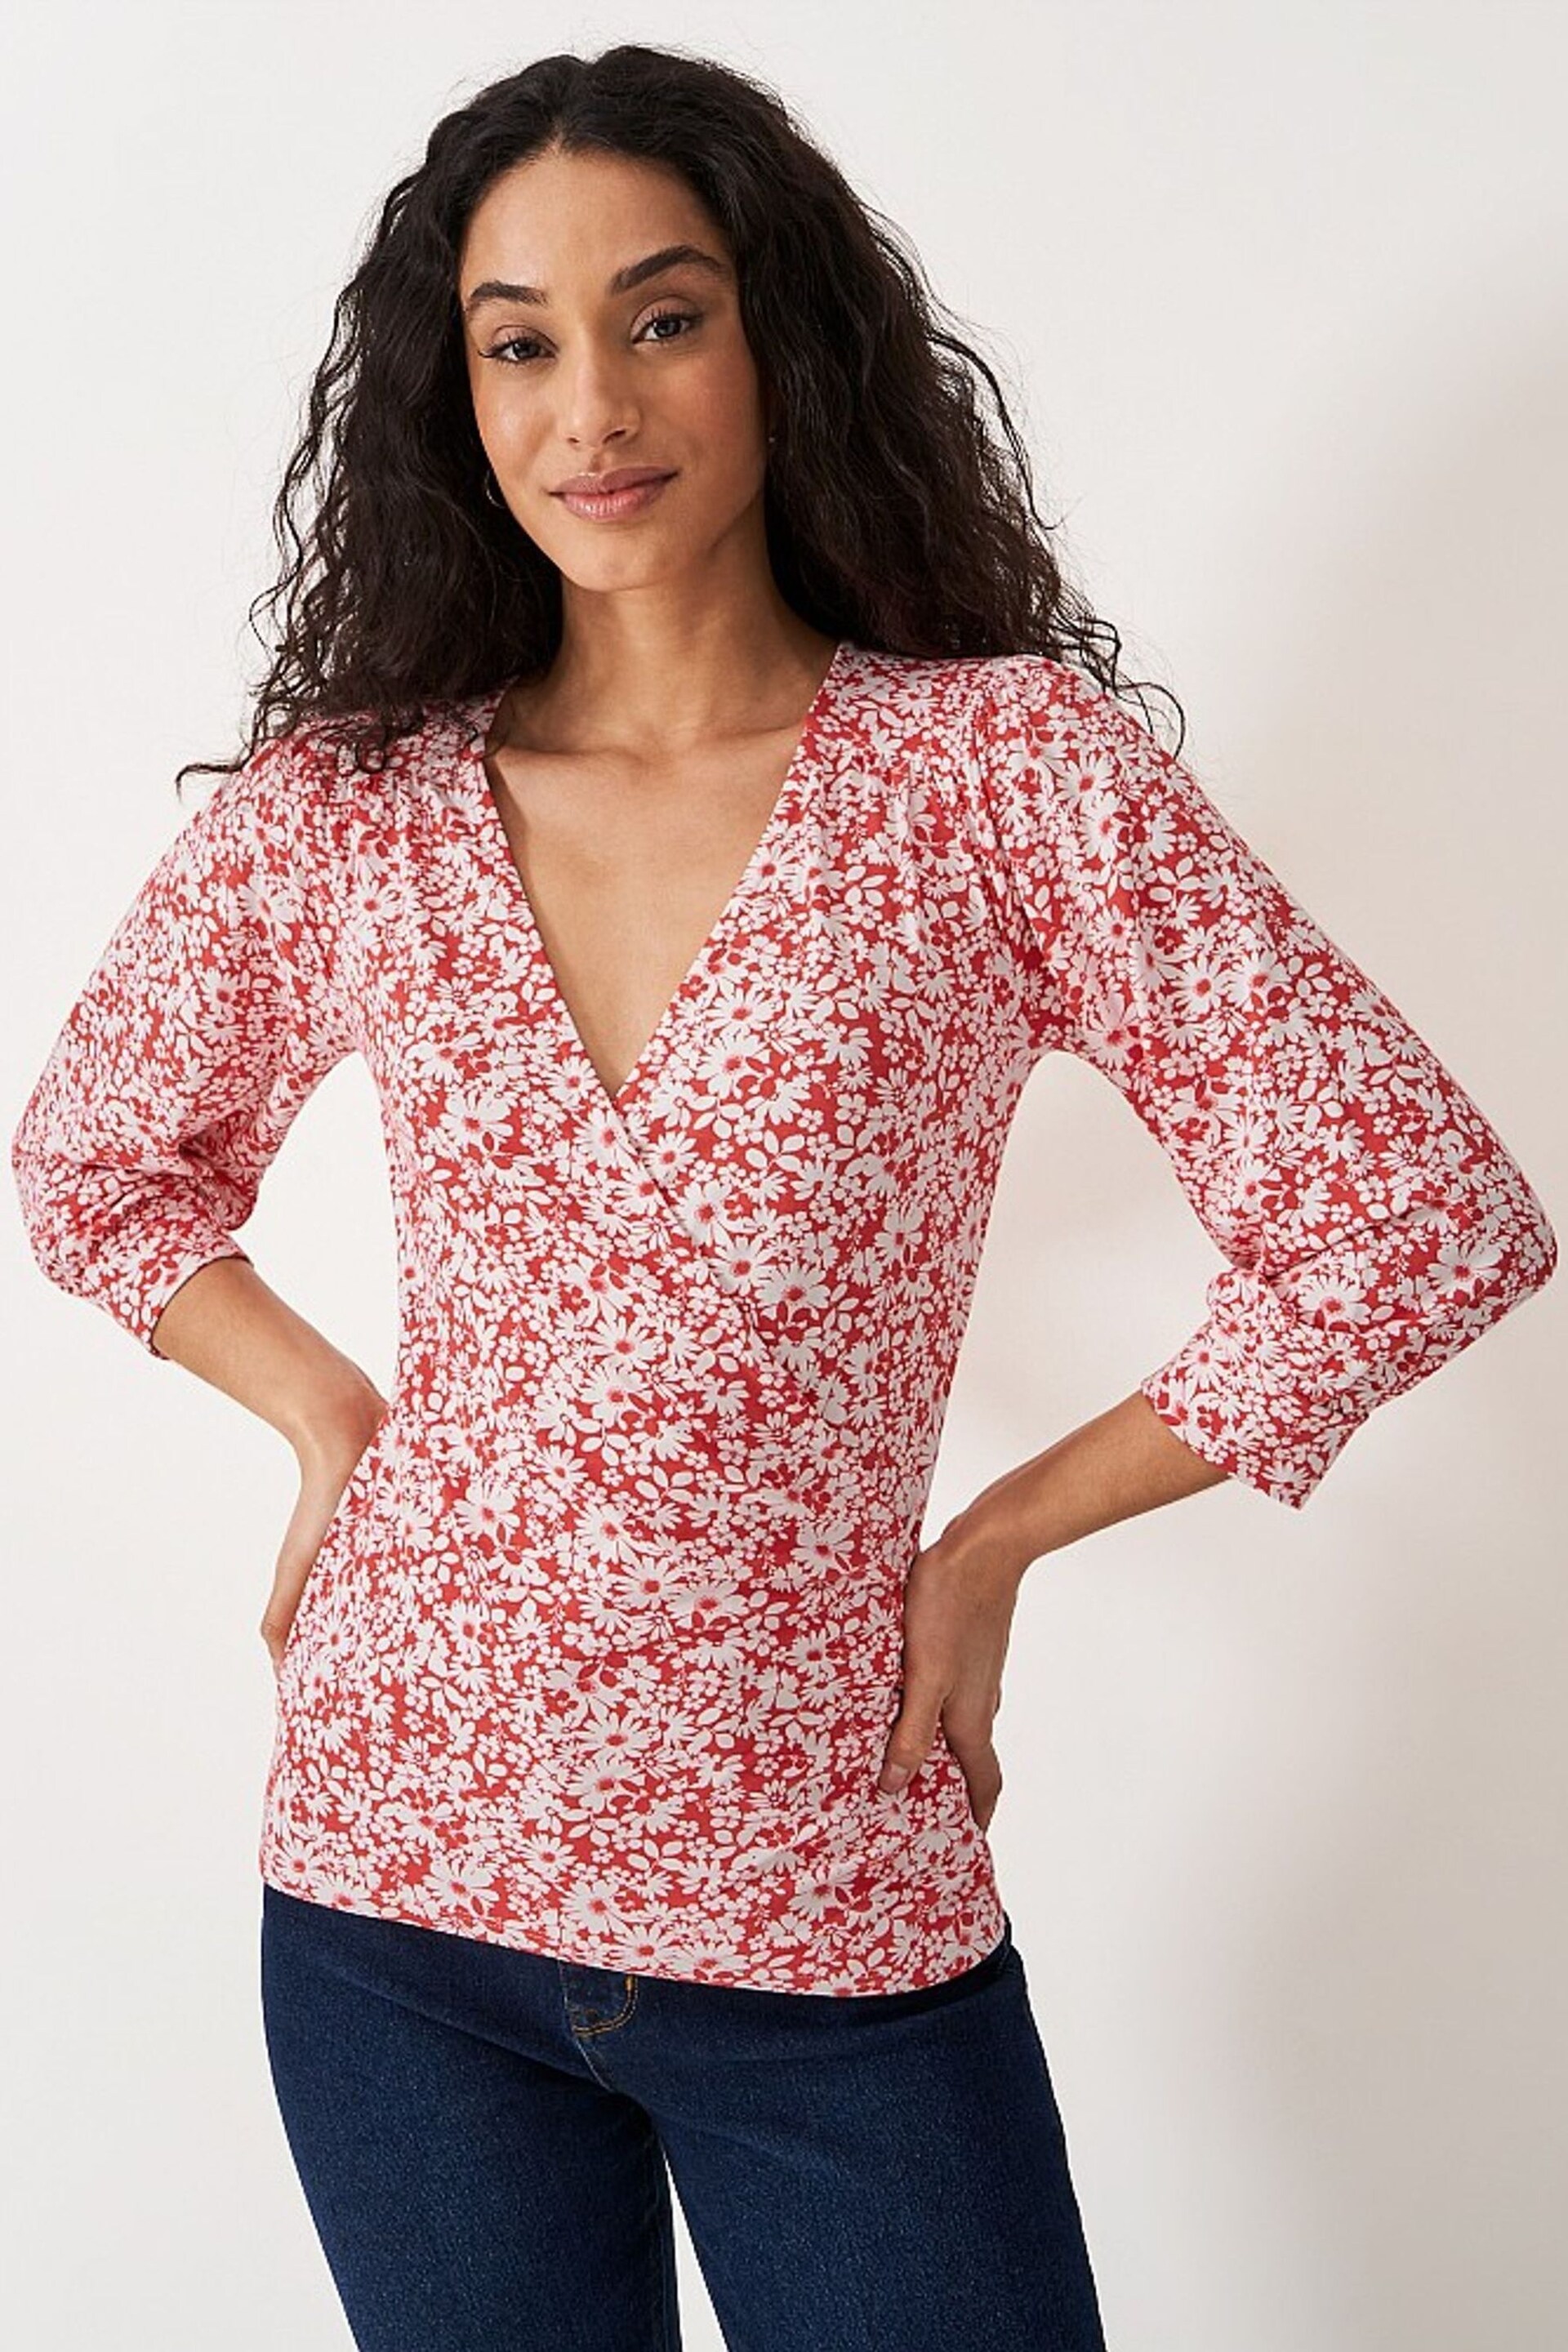 Crew Clothing Company Red Plain Viscose Casual Blouse - Image 1 of 4